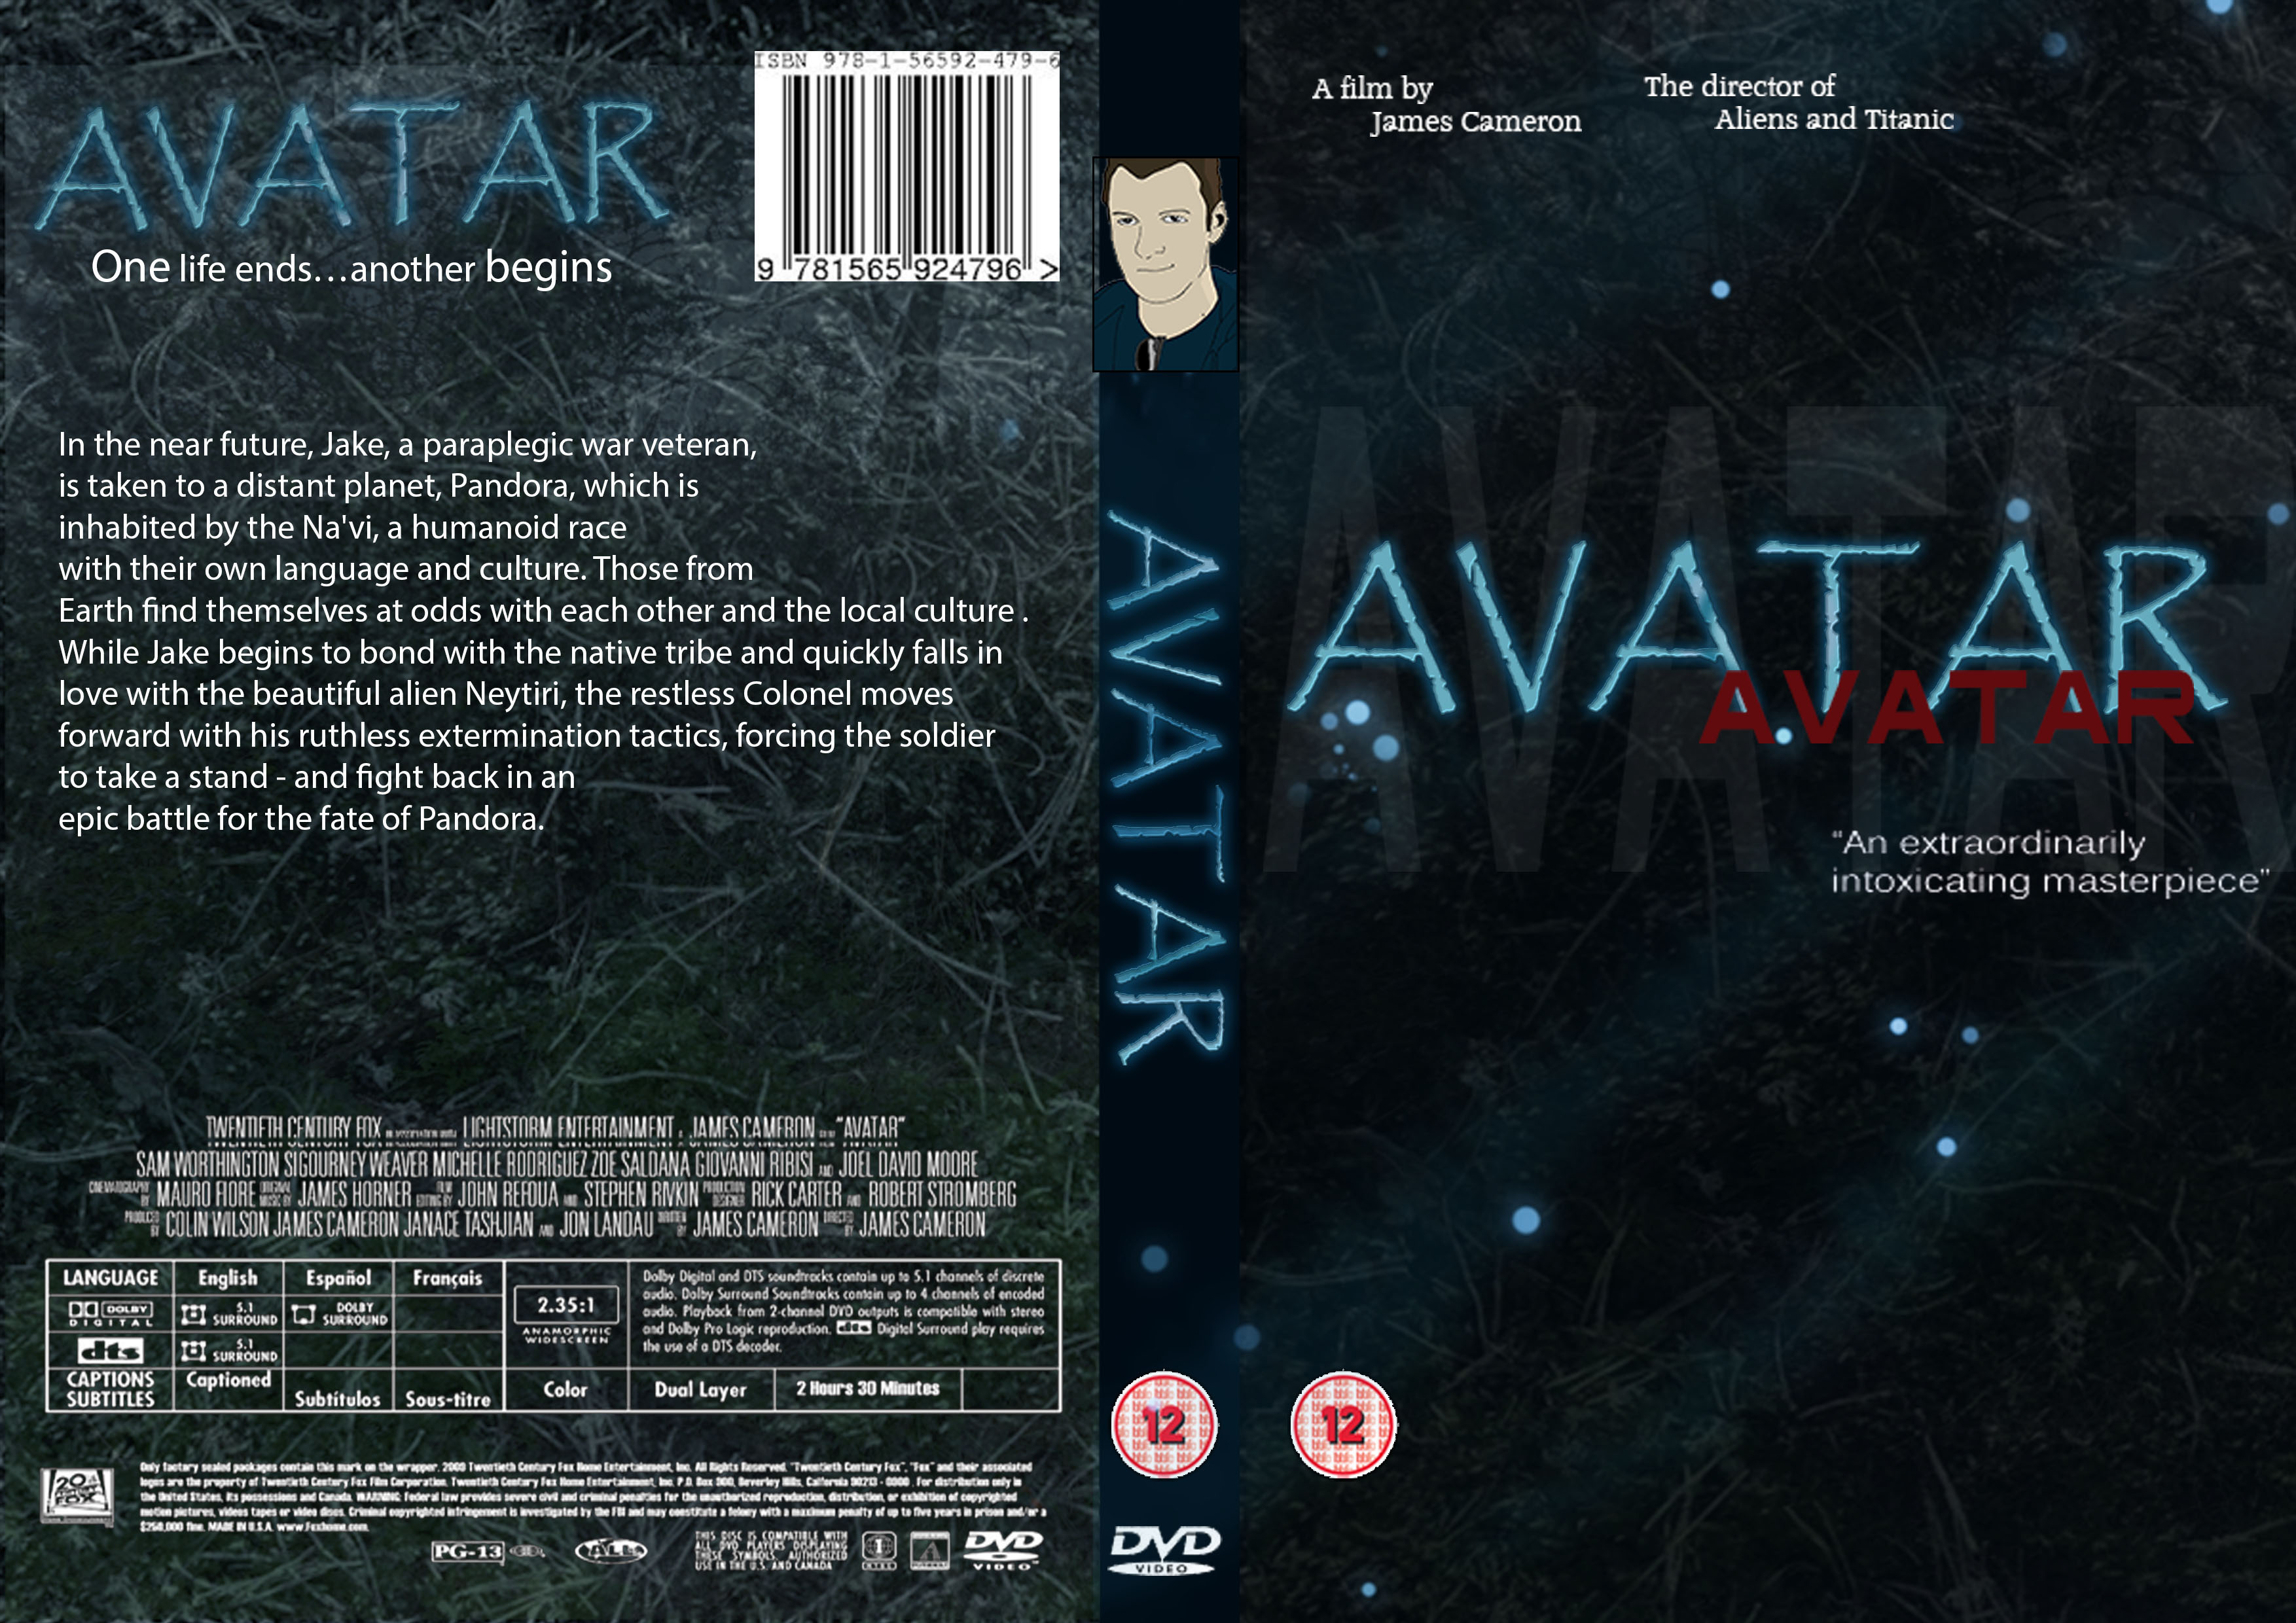 First DVD cover design